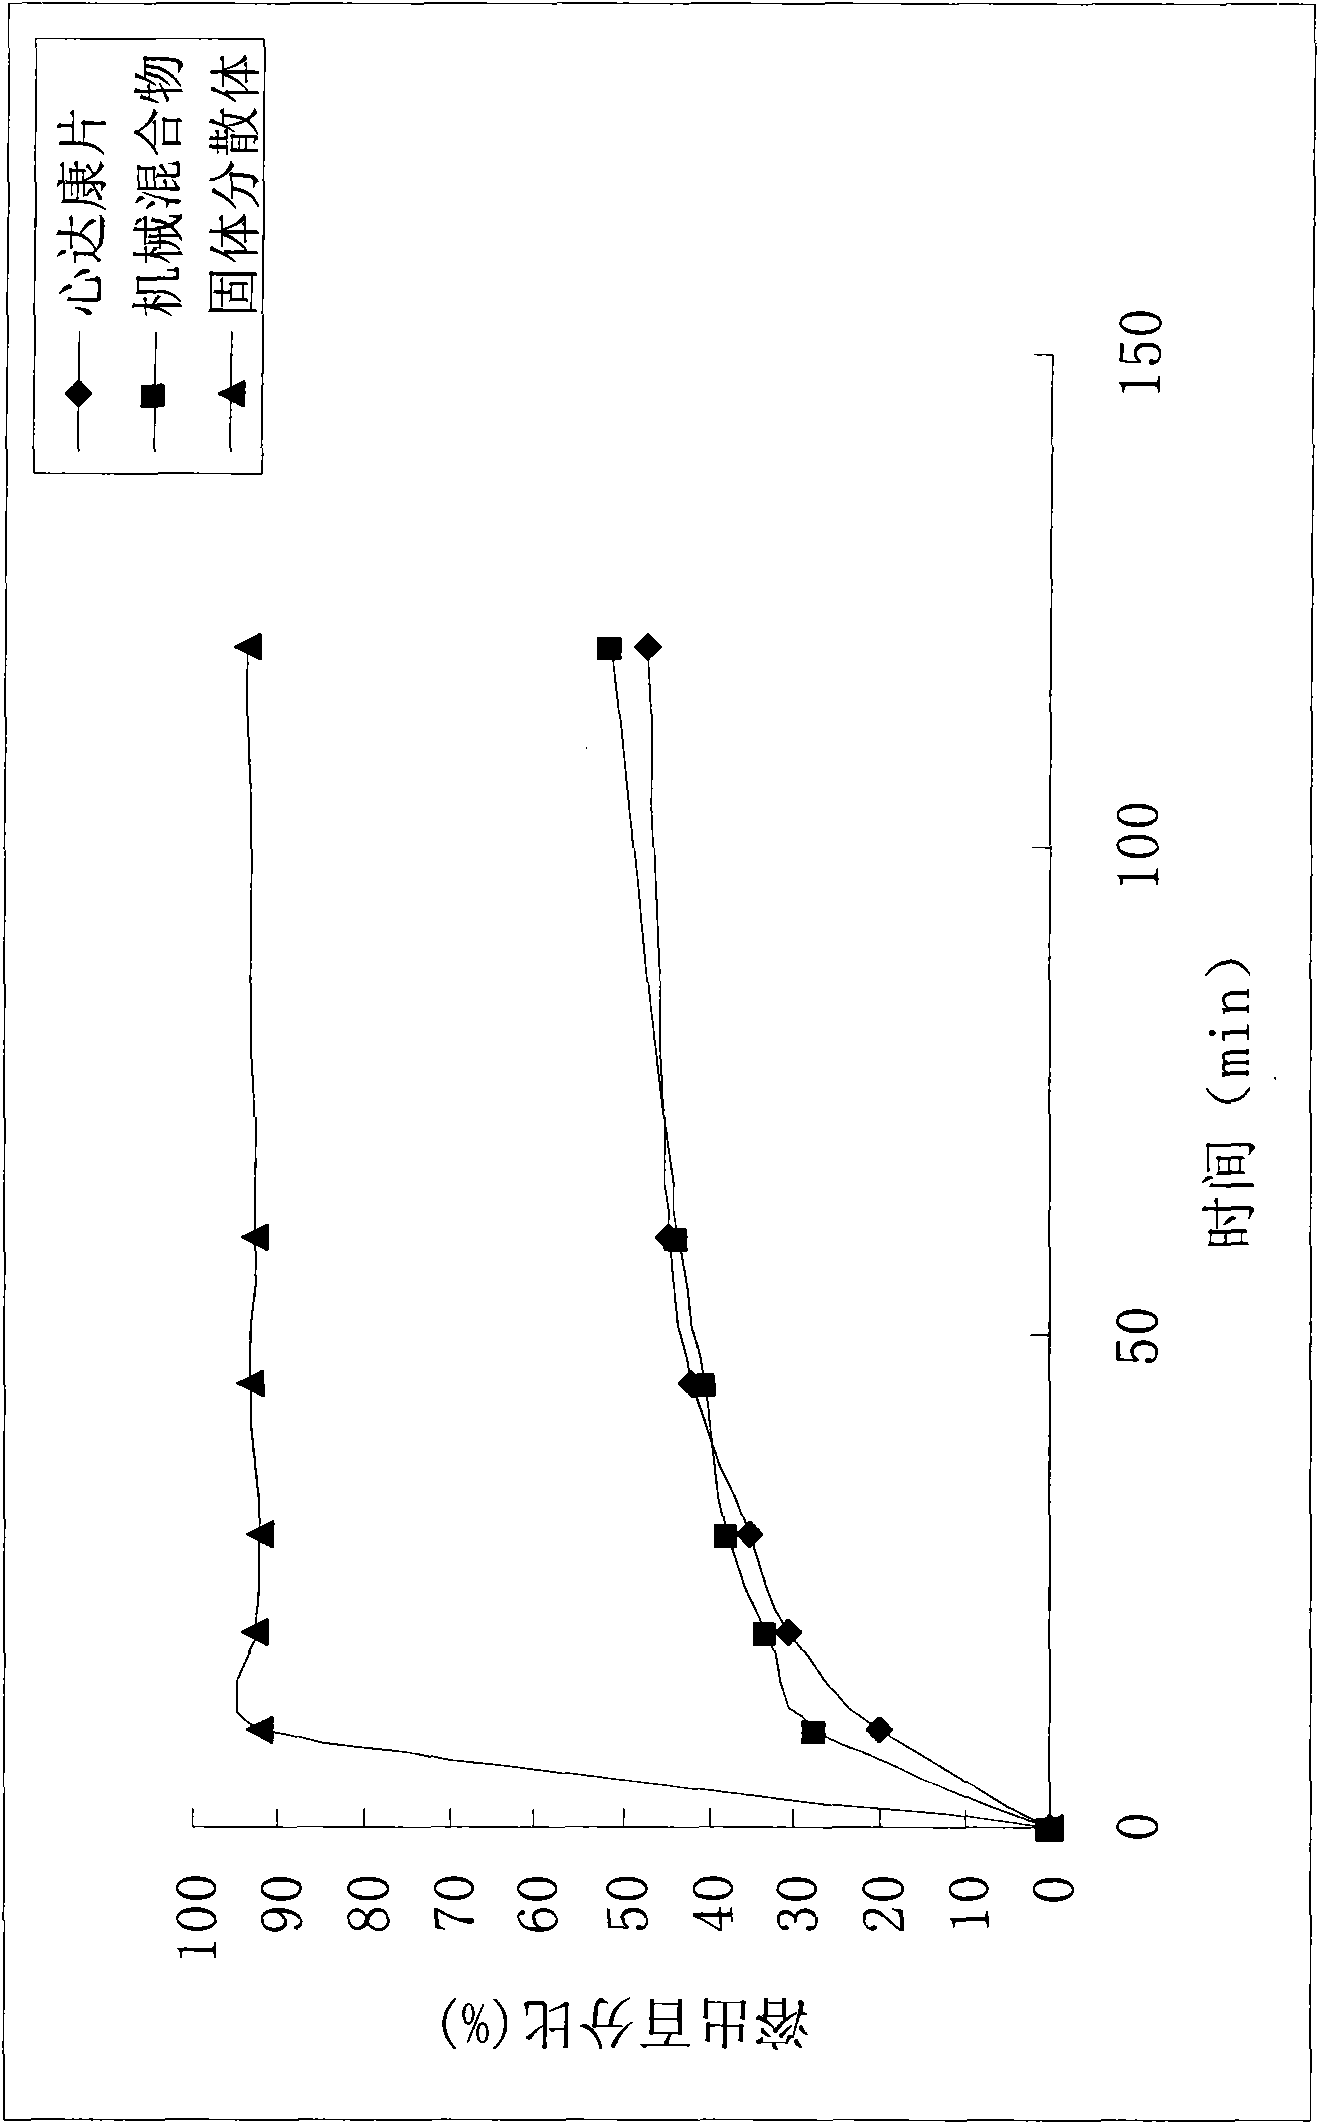 Flavone acetylsalicylate solid dispersion and preparation method thereof